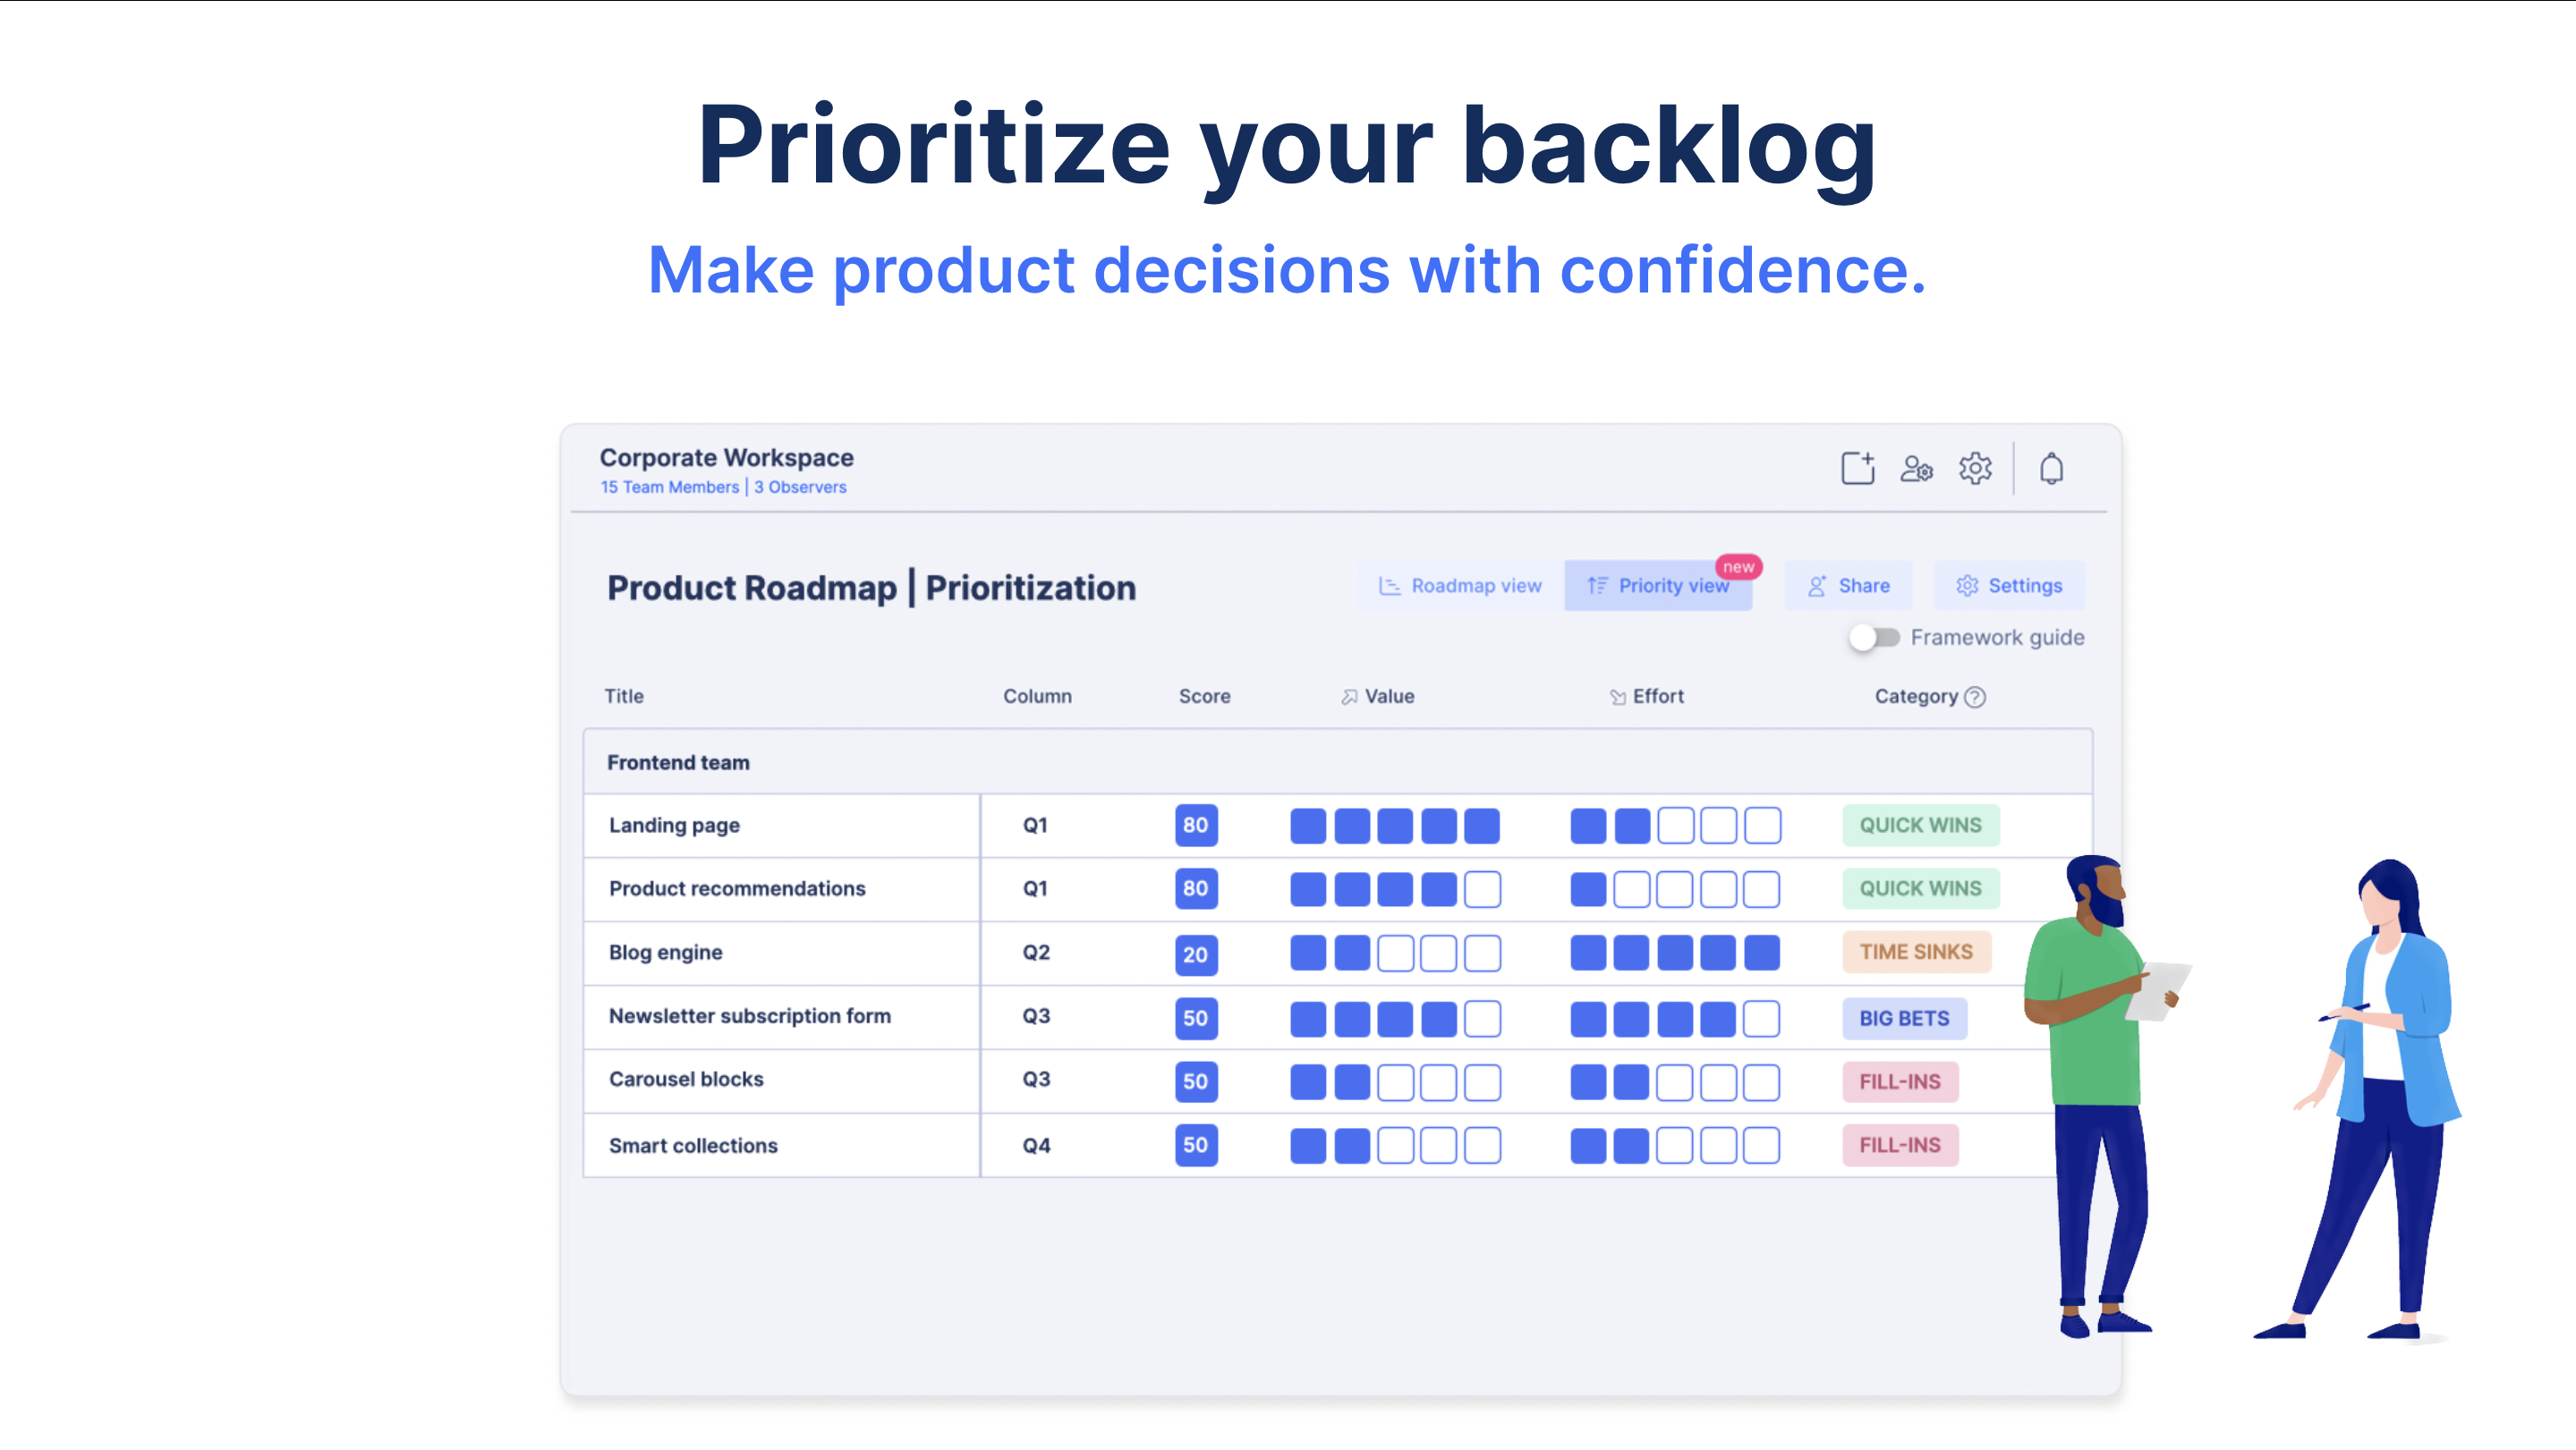 Choose from the most popular prioritization methods or create custom prioritization workflows for your team.